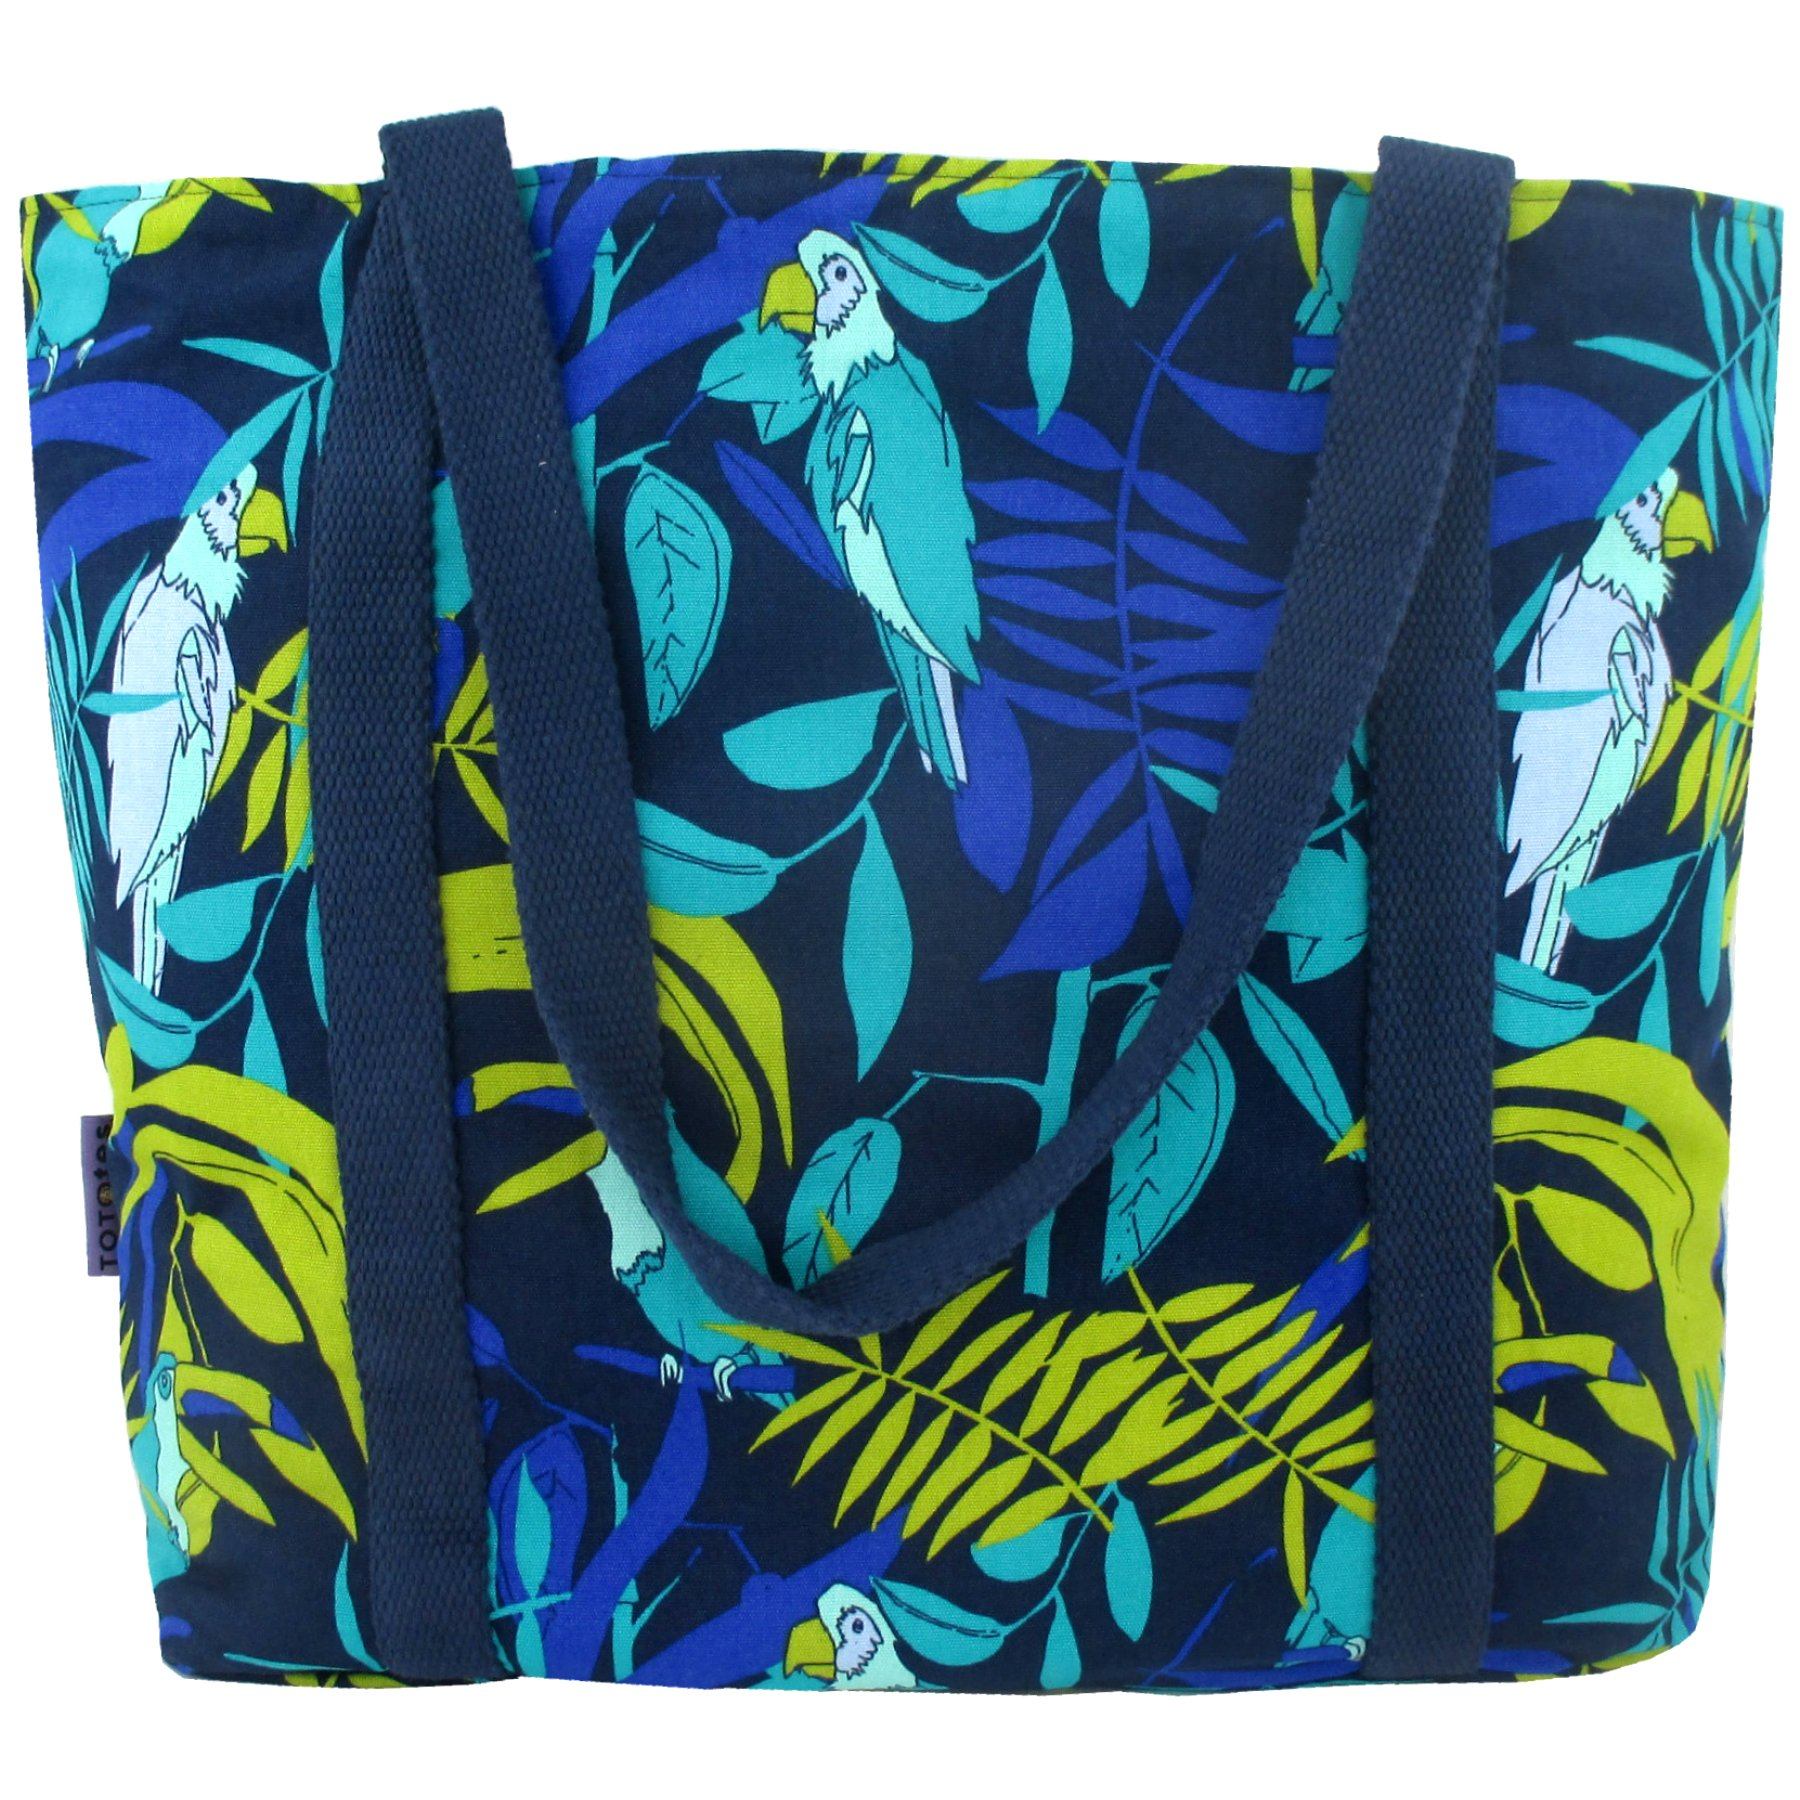 Toucans Parrots Bird and Leaves All Over Tropical Jungle Print Tote Bag Shopping Beach Bag